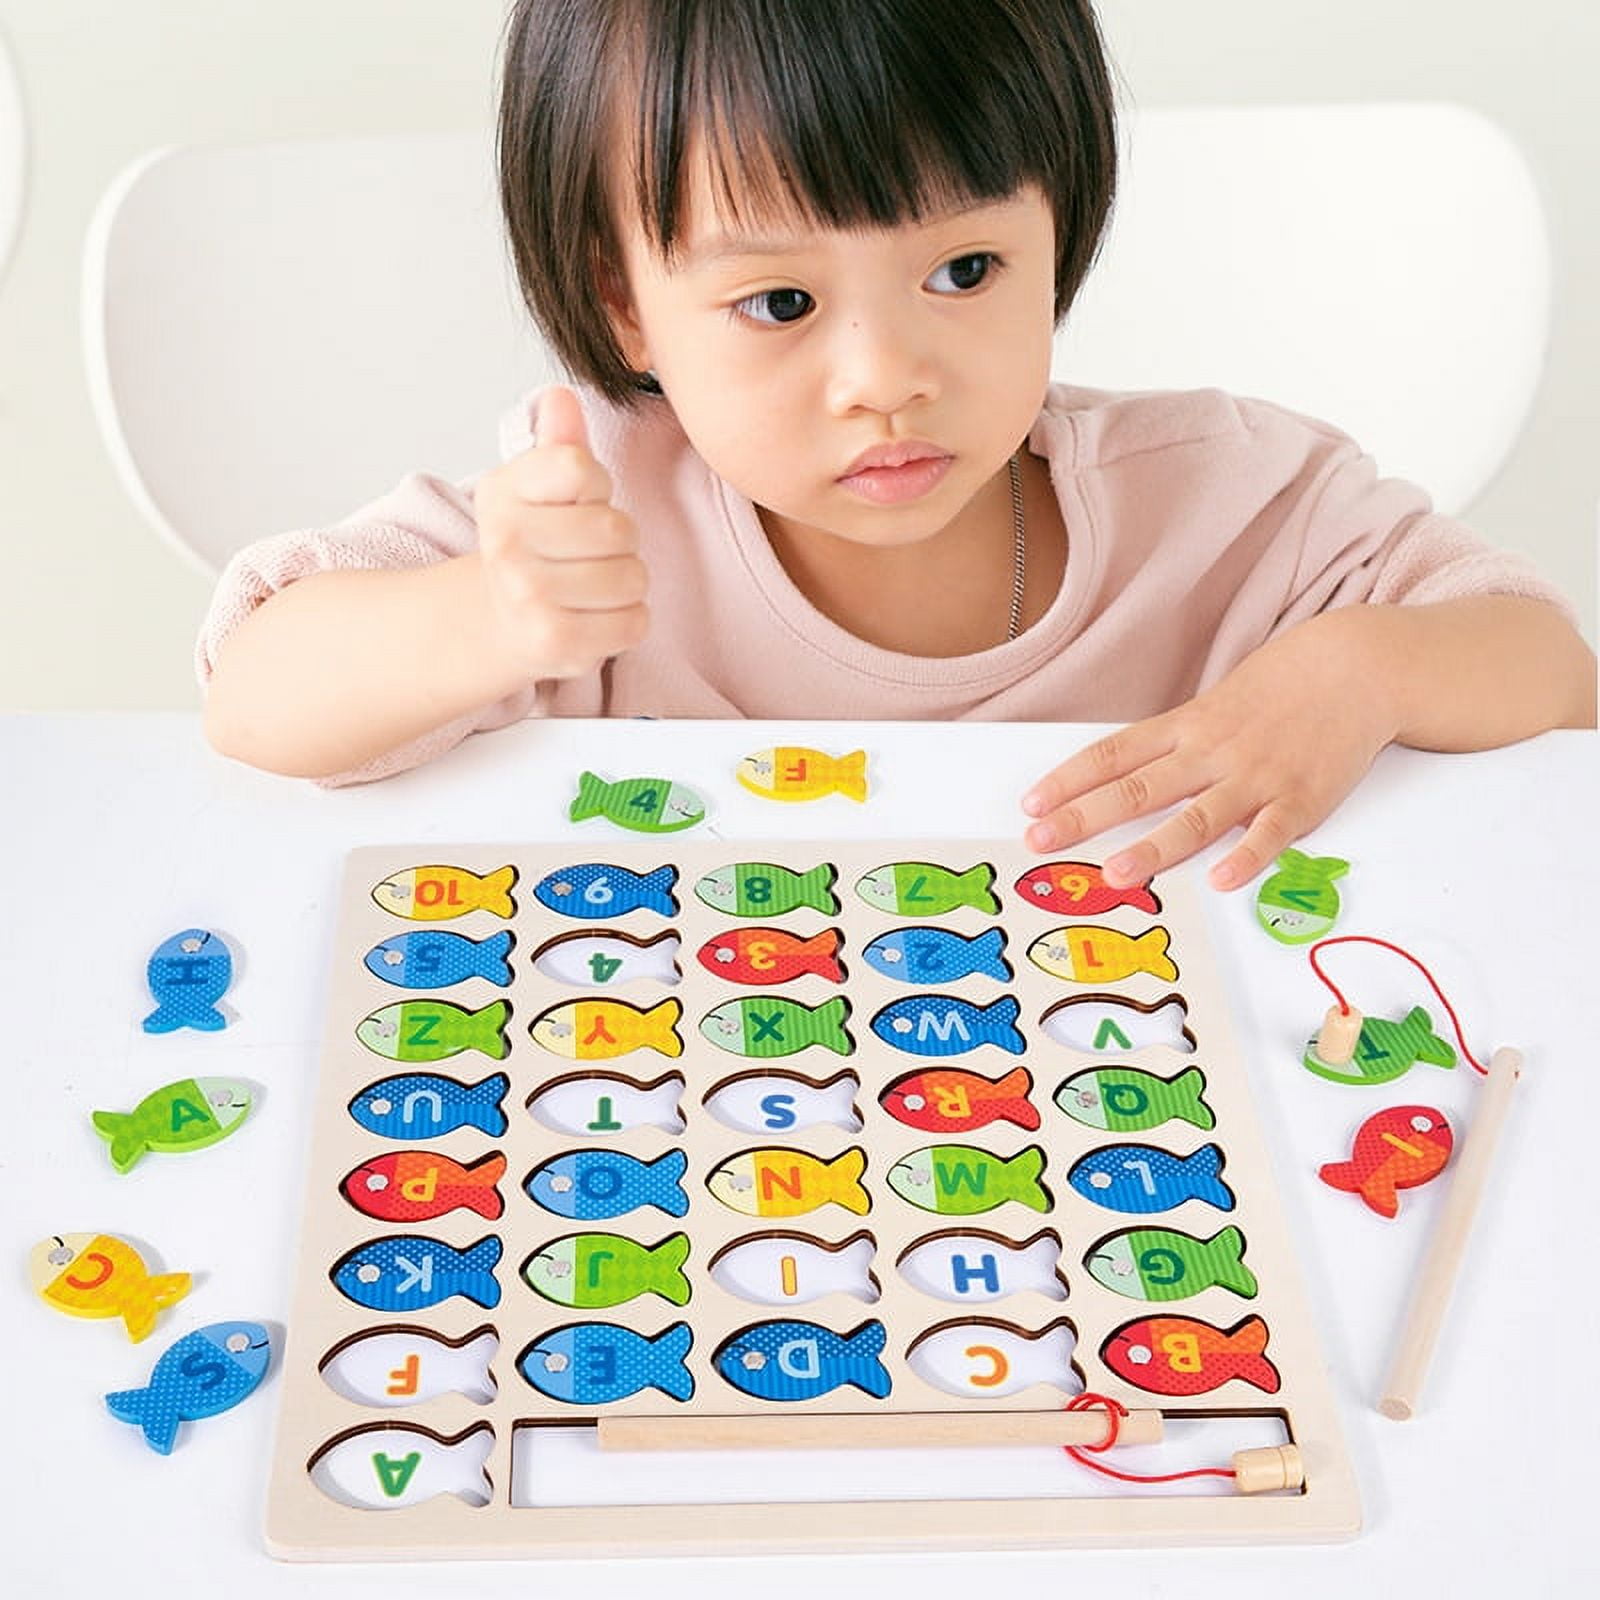  Toddler Learning Educational Toys Wooden Magnetic Fishing  Game Toy- Alphabet ABC Color Sorting Counting Toys Number Learning Toys  Montessori Fine Motor Skills Toy